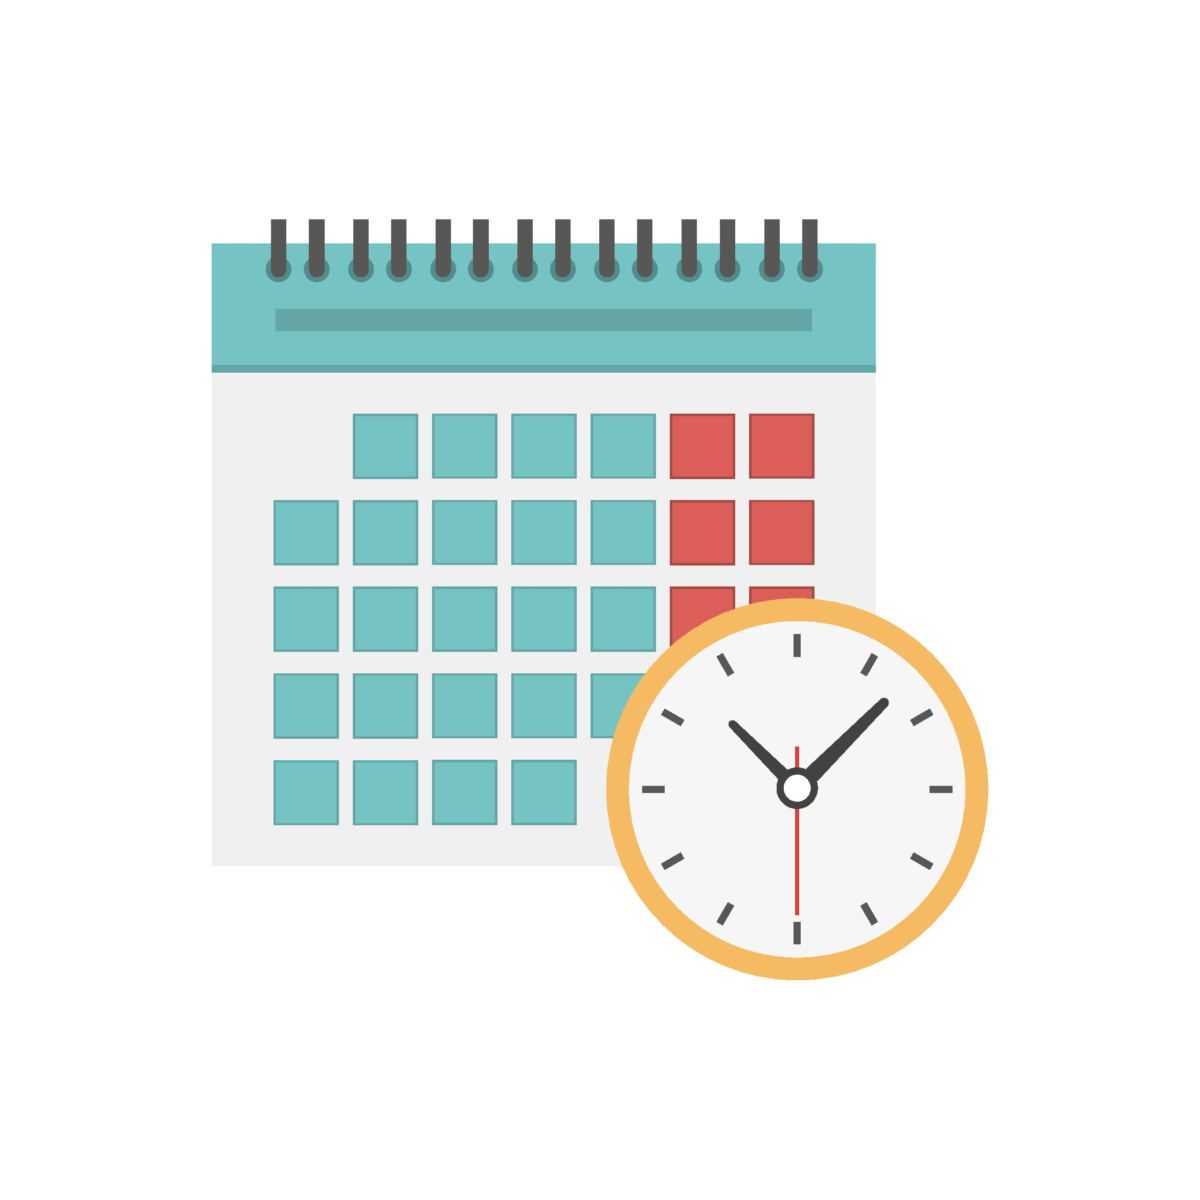 Graphic image of a blue and red calendar and a yellow clock to represent the concept of time.